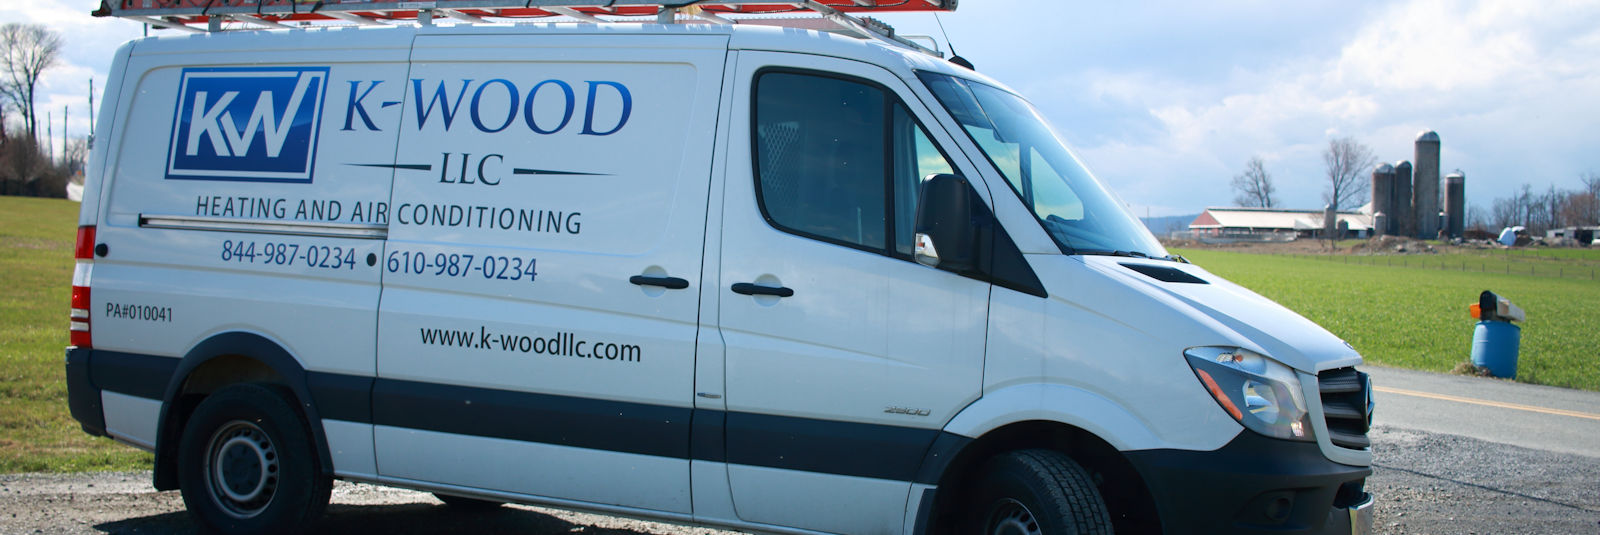 Residential and Commercial Heating and Air